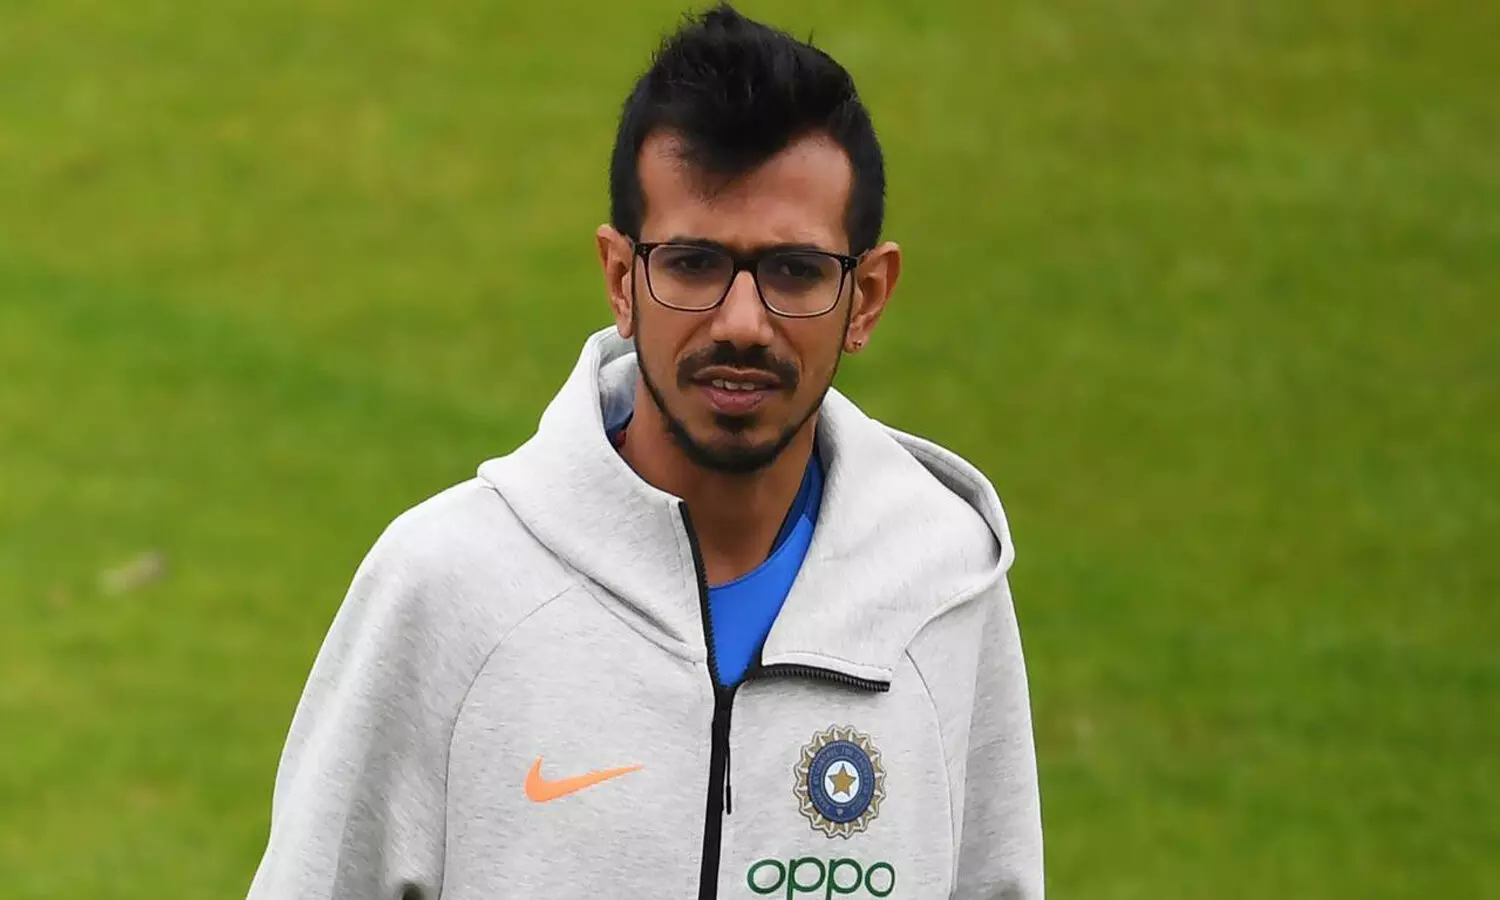 Yuzvendra Chahal & Krishnappa Gowtham also test positive for COVID 19 after Krunal Pandya